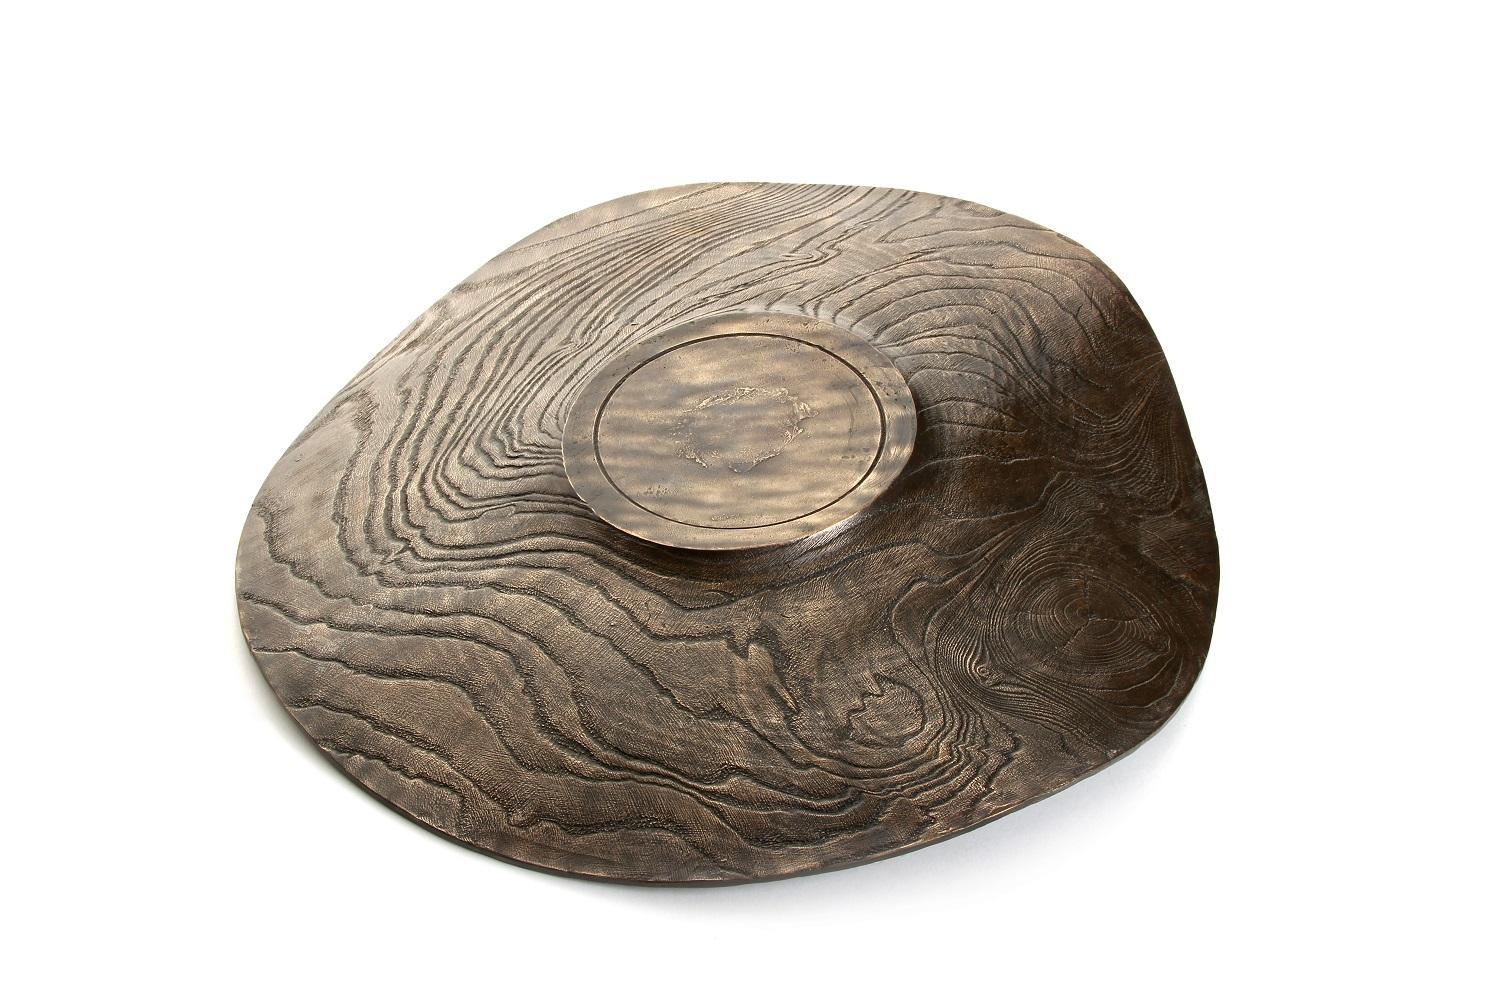 Solid Bronze ‘Willow Platter’ or Dish with Wood Texture and Blackened Patina (amerikanisch) im Angebot